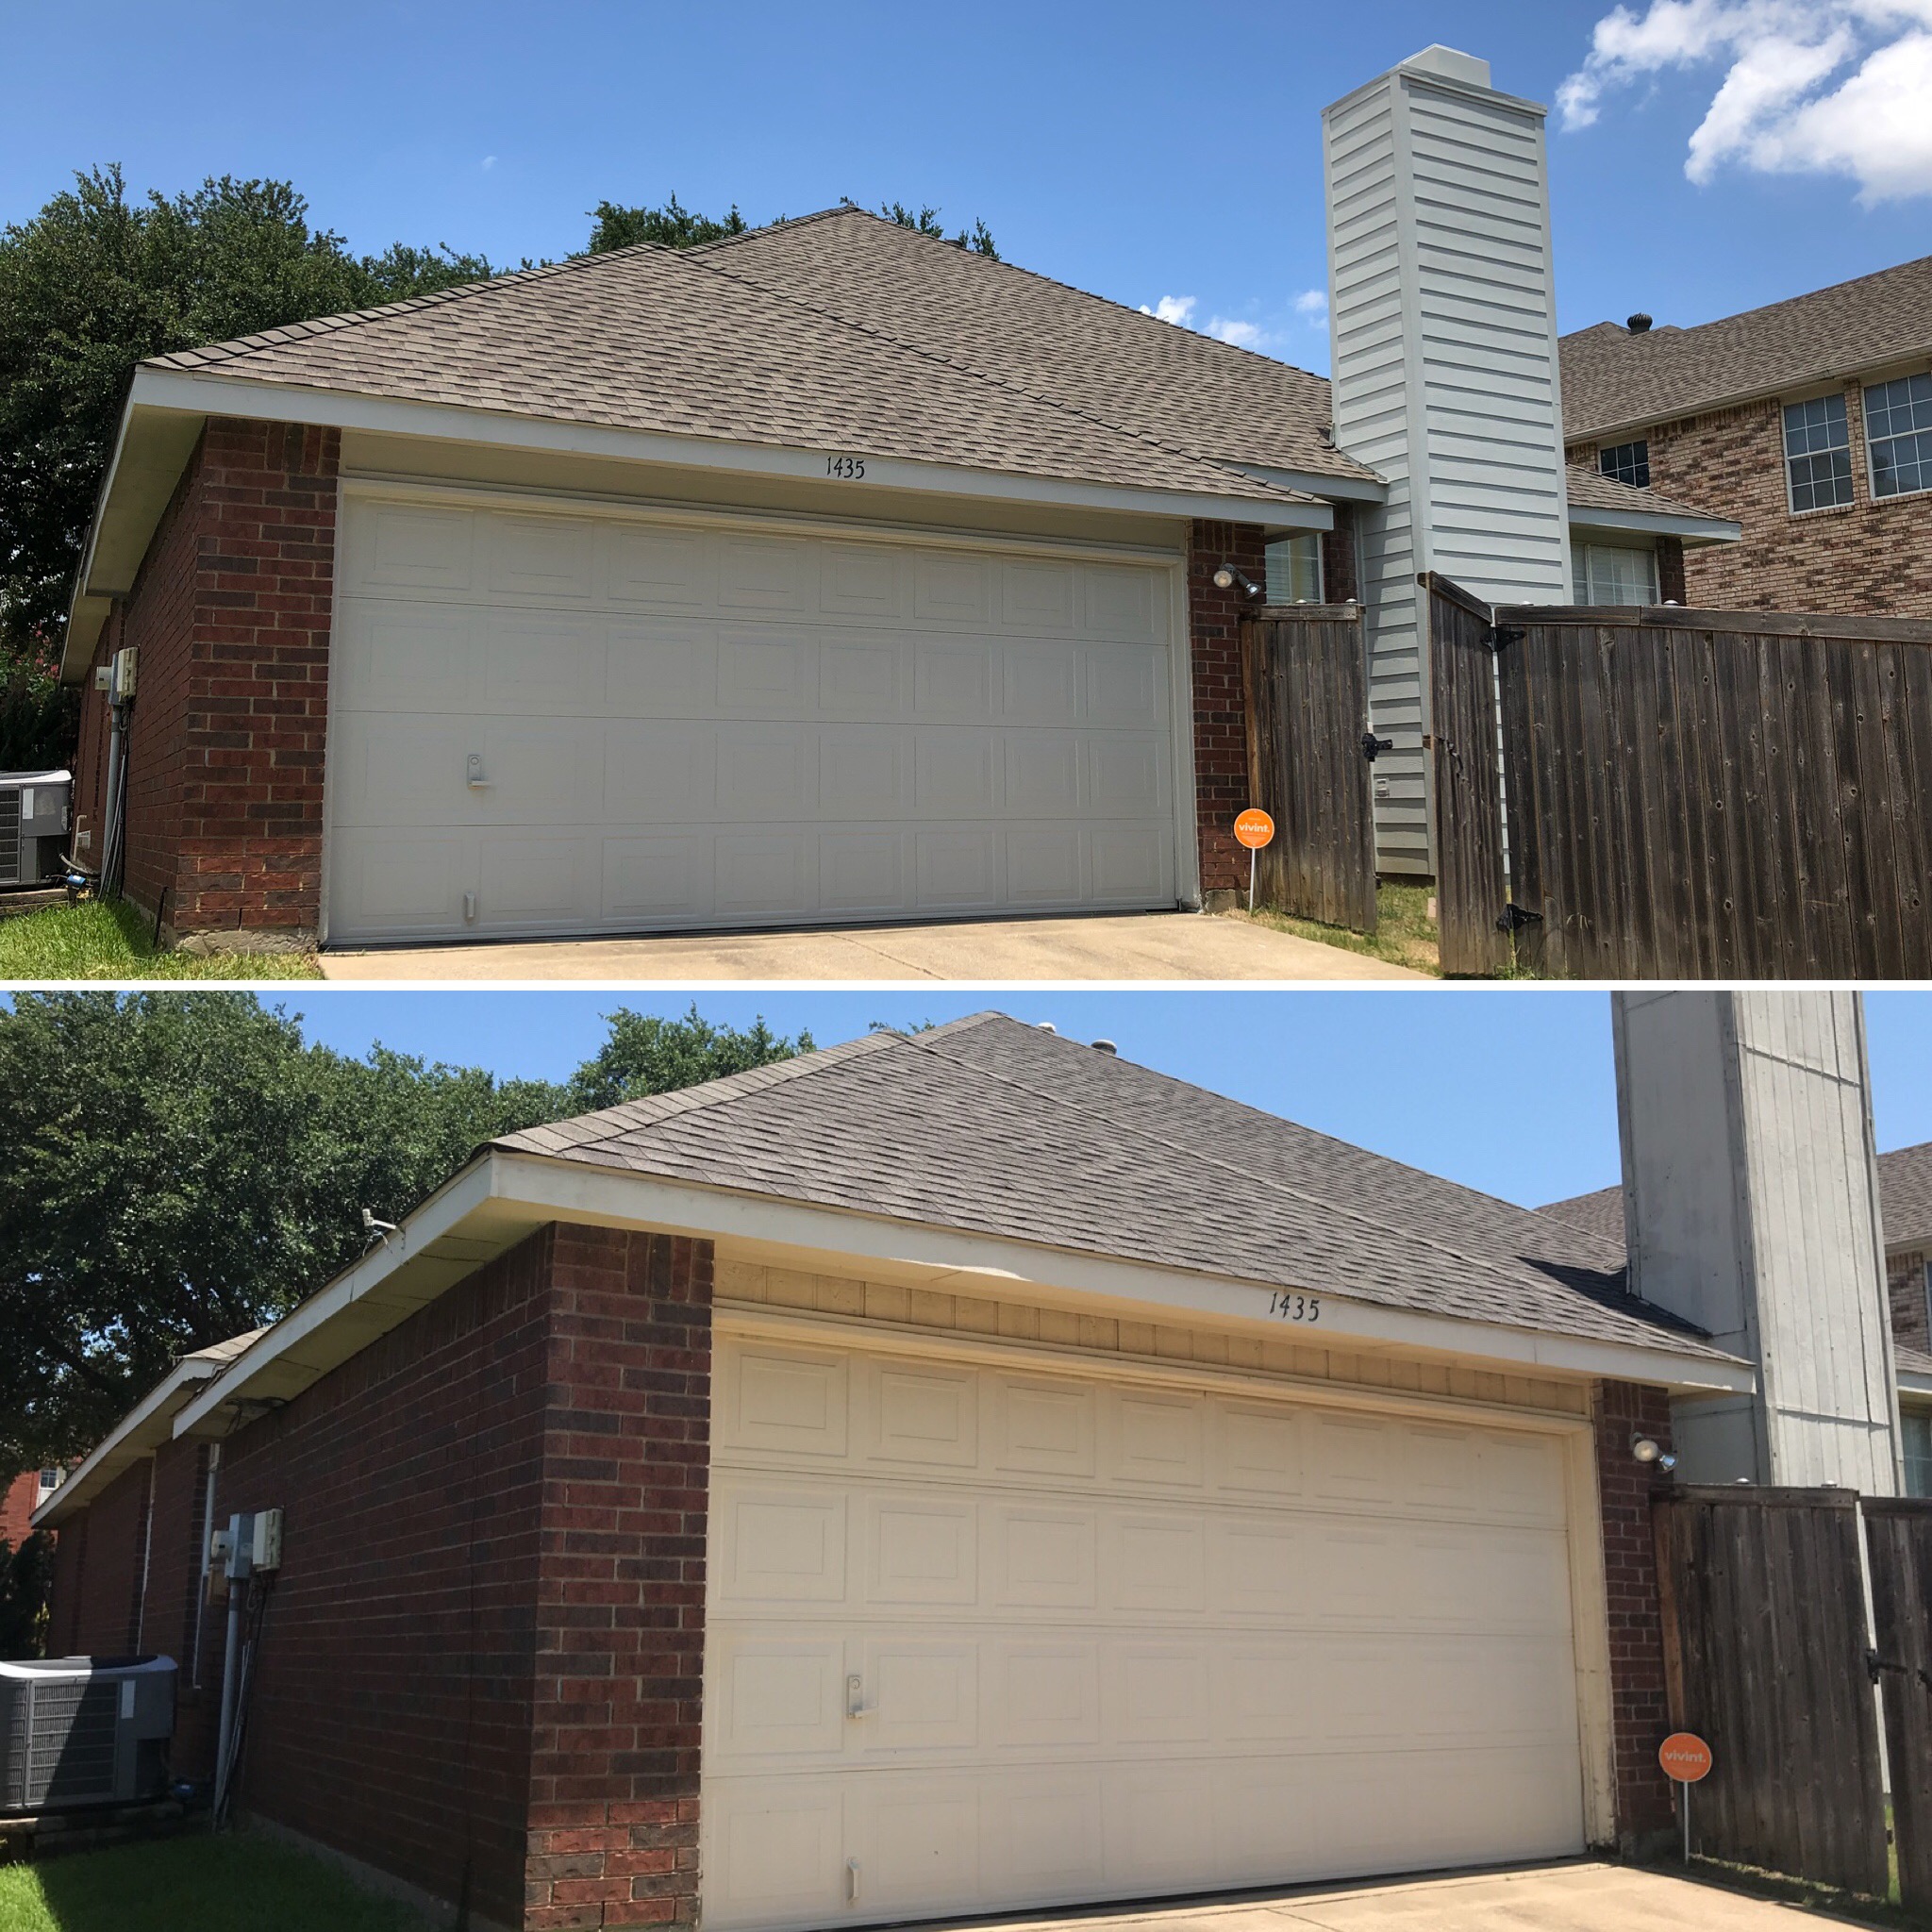 Before and after photos showing chimney siding replacement on roof of a home in North Texas